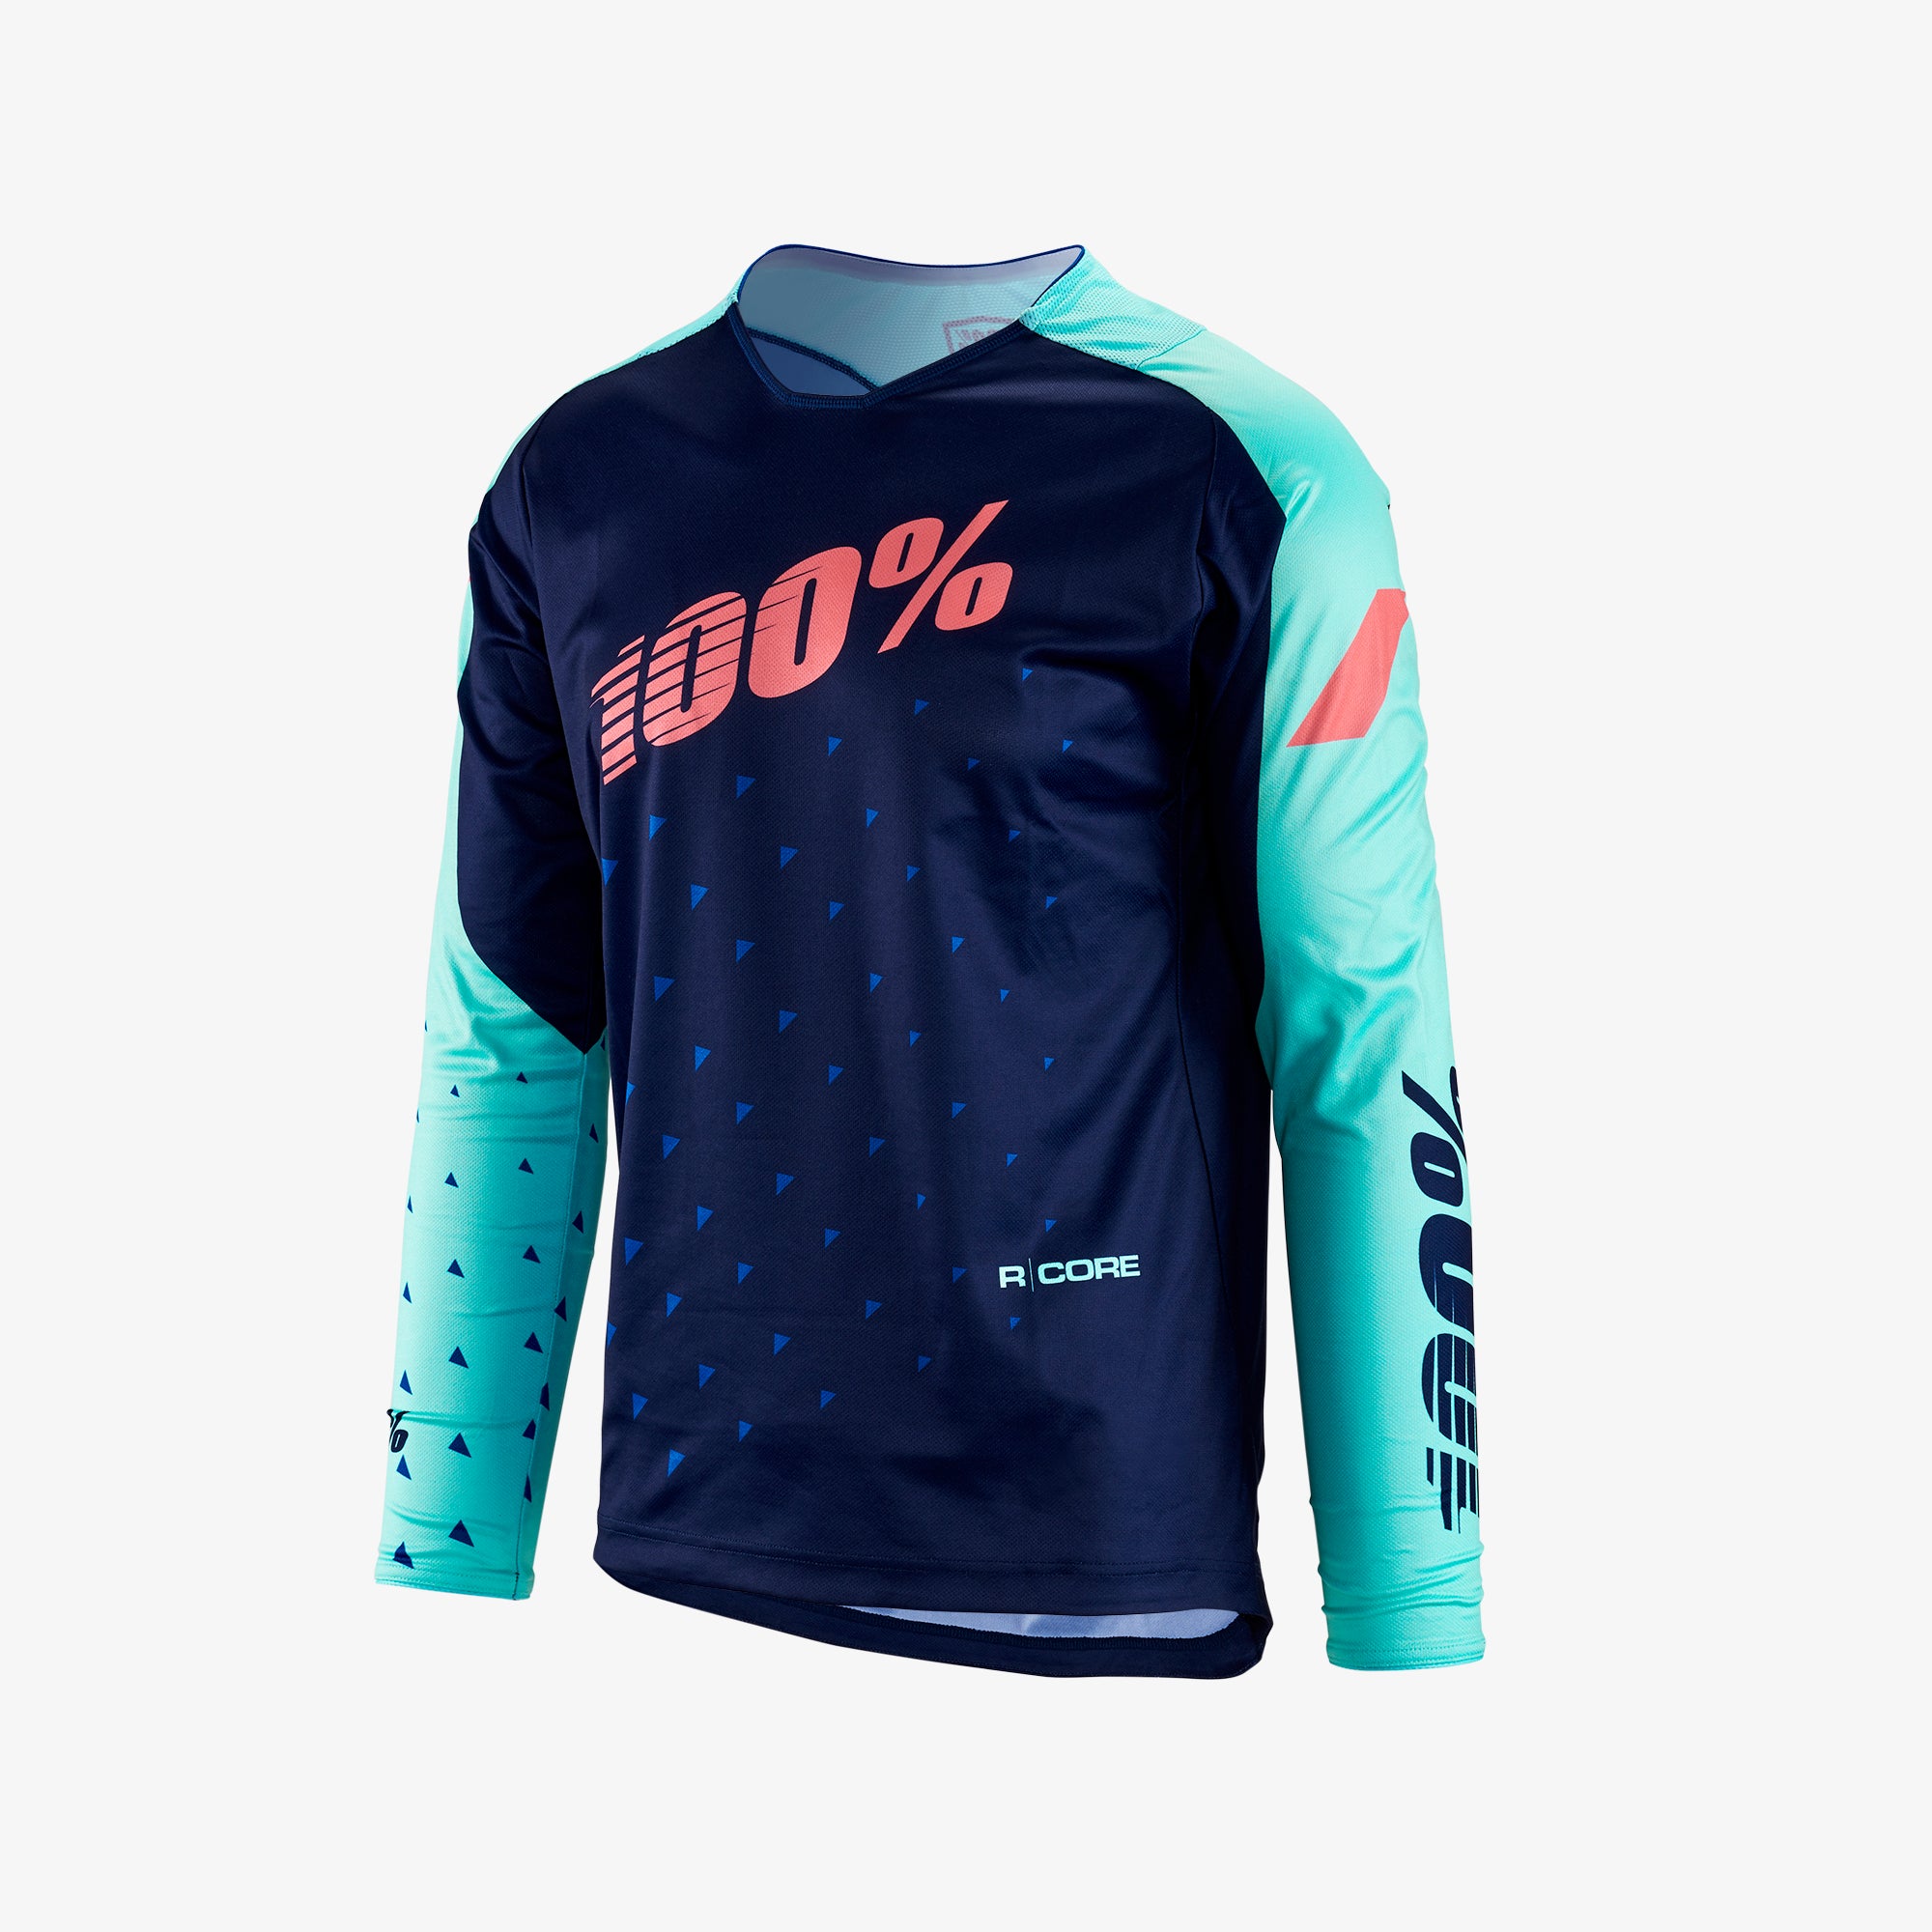 R-CORE DH Jersey - Navy – 100%